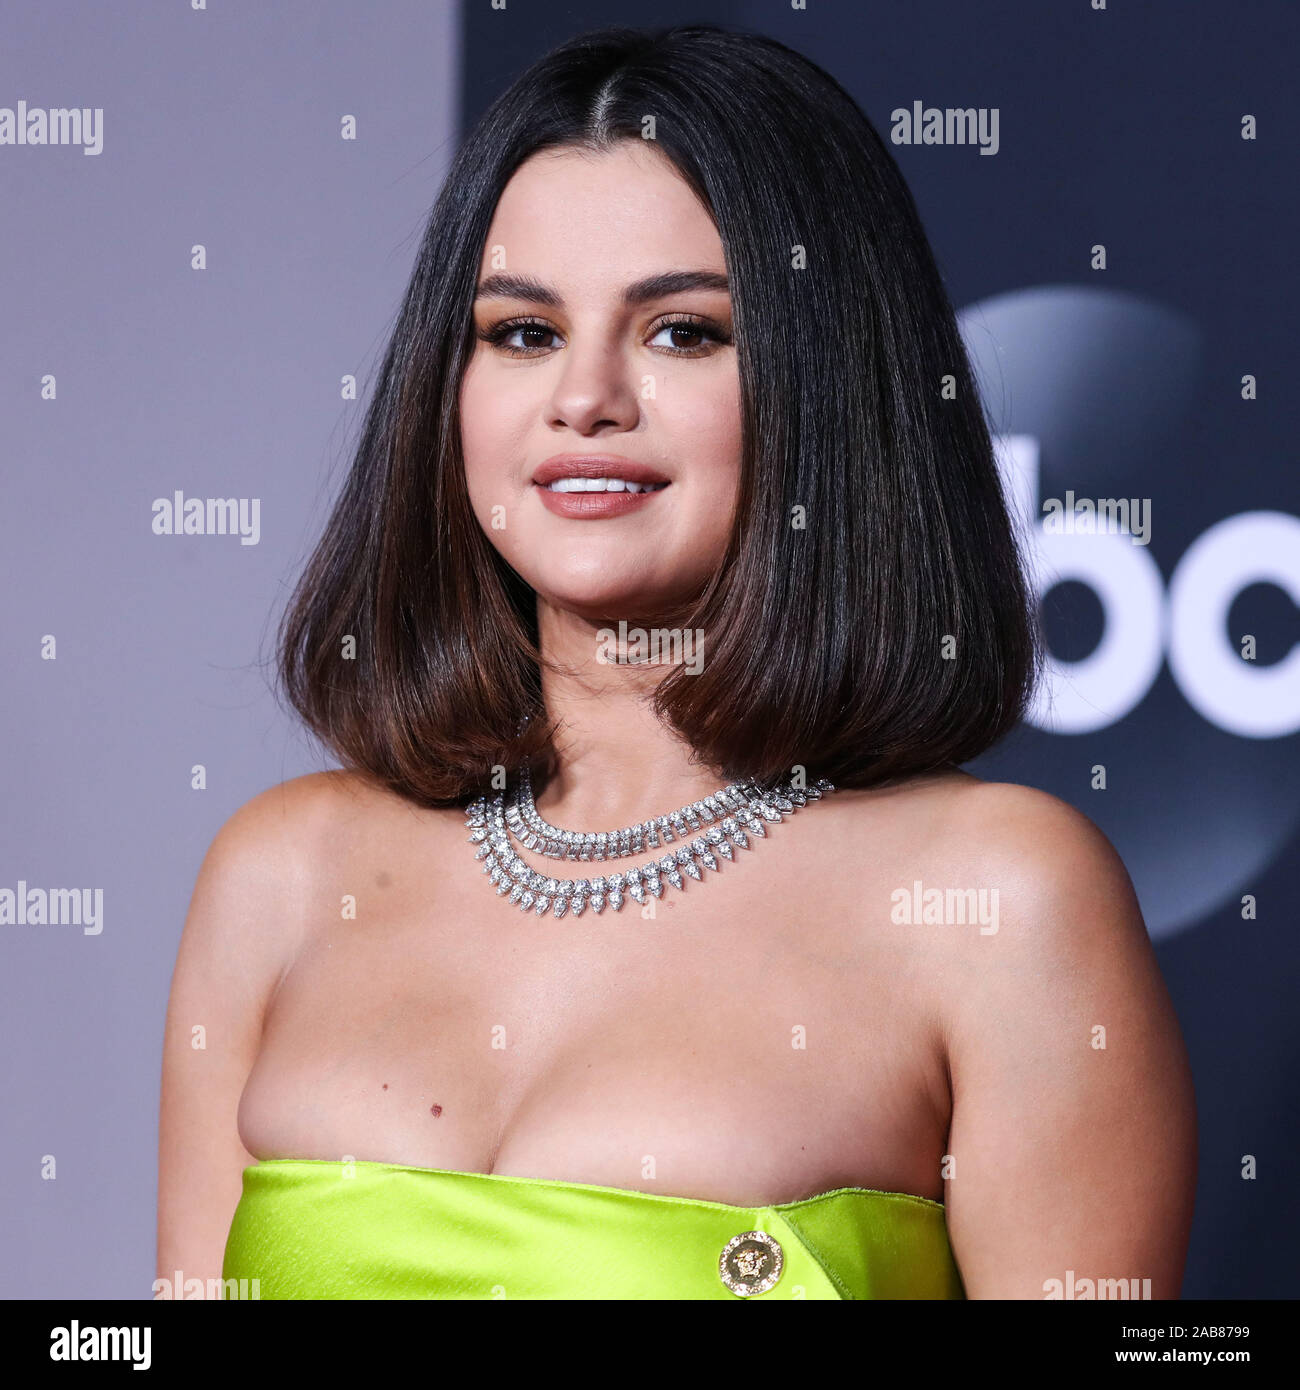 LOS ANGELES, CALIFORNIA, USA - NOVEMBER 24: Singer Selena Gomez wearing a Versace dress and shoes with Roberto Coin jewelry arrives at the 2019 American Music Awards held at Microsoft Theatre L.A. Live on November 24, 2019 in Los Angeles, California, United States. (Photo by Xavier Collin/Image Press Agency) Stock Photo